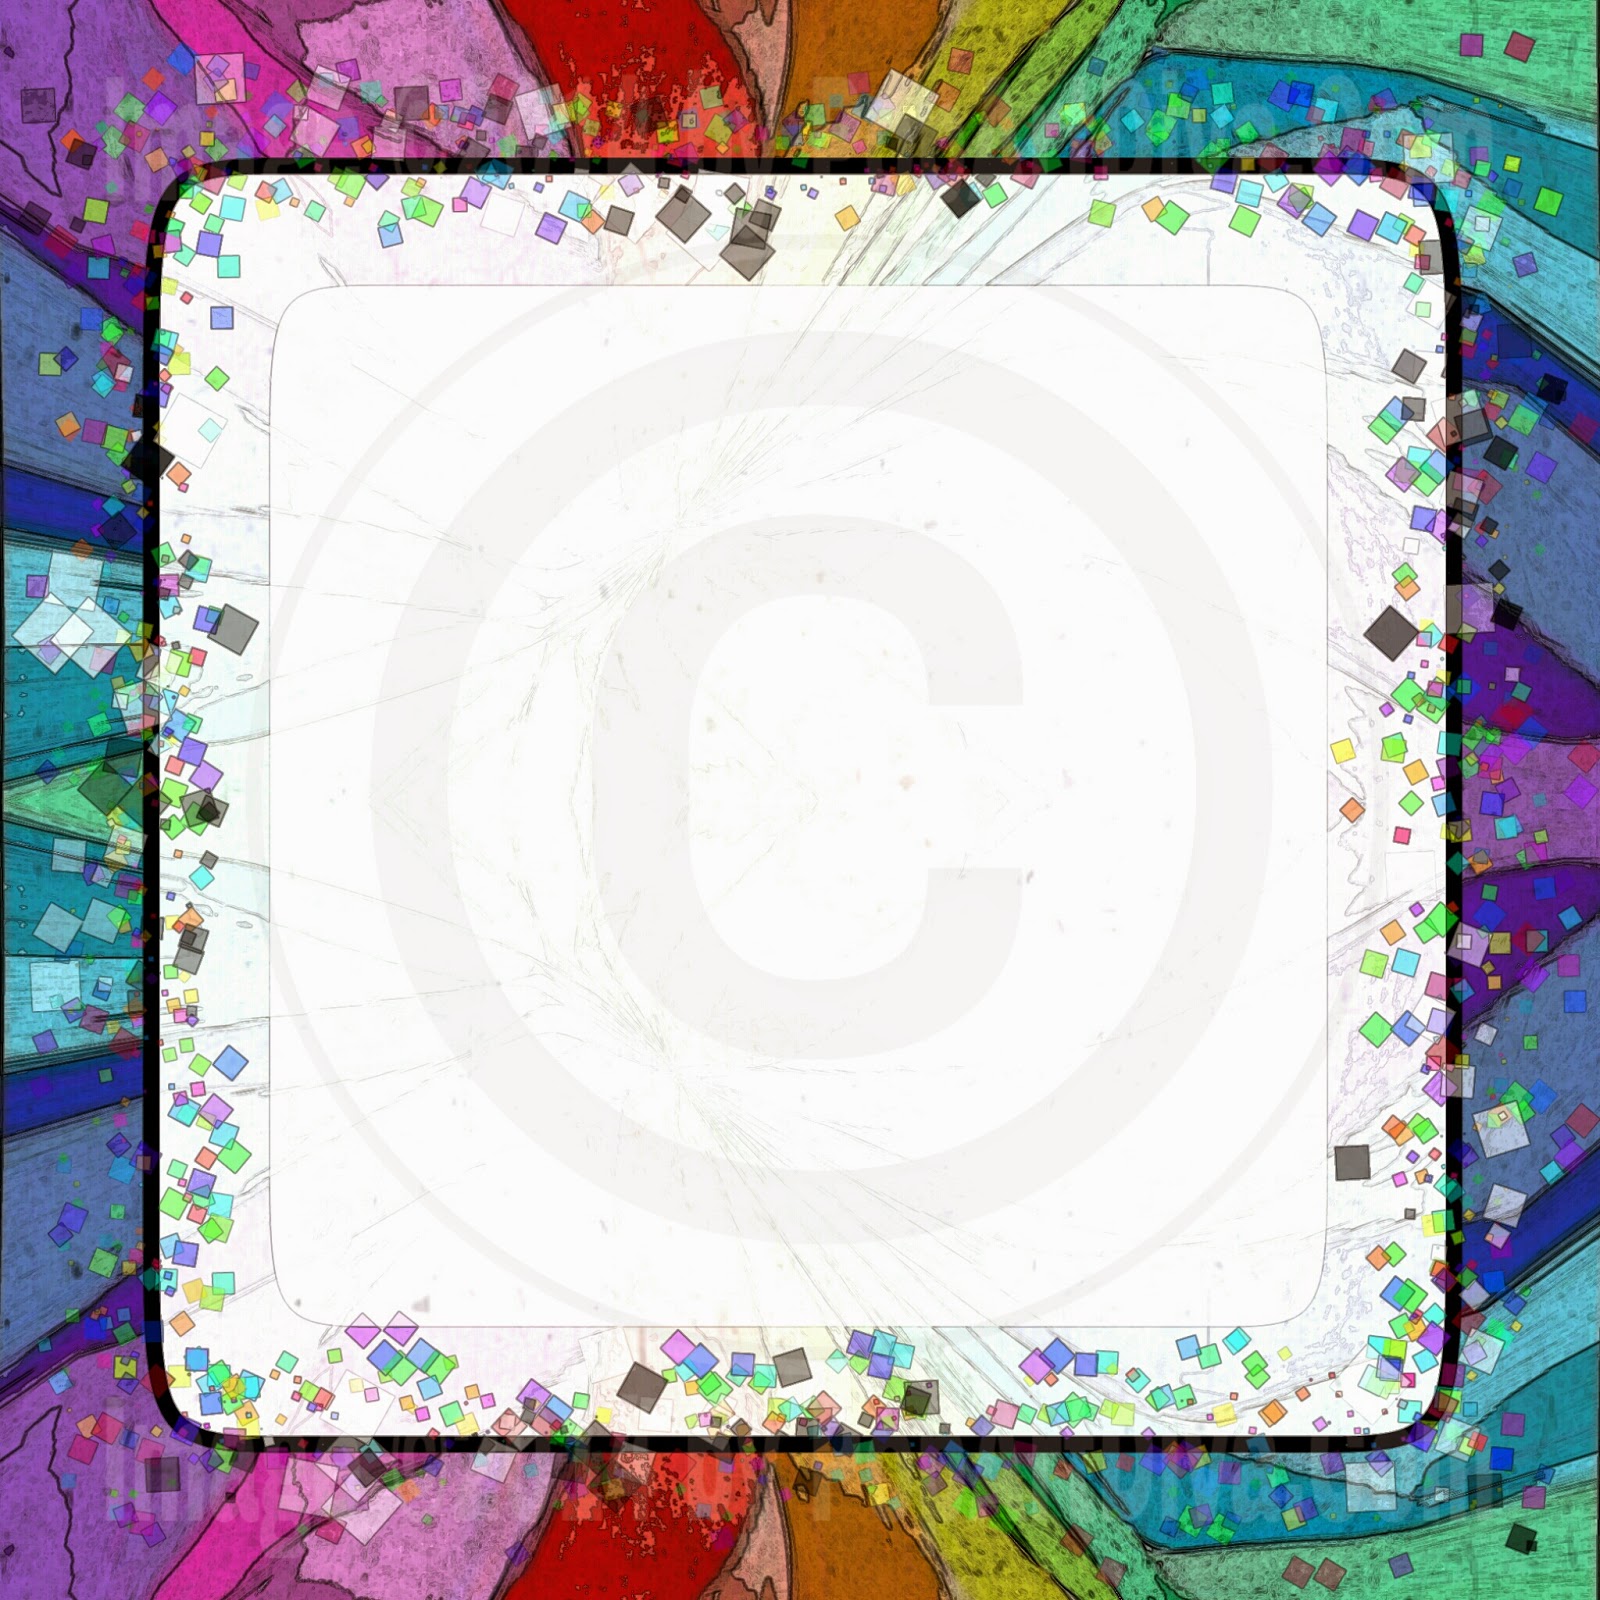 http://store.payloadz.com/details/2084283-photos-and-images-clip-art-kaleidoscope-square-frame-border-web-graphic.html